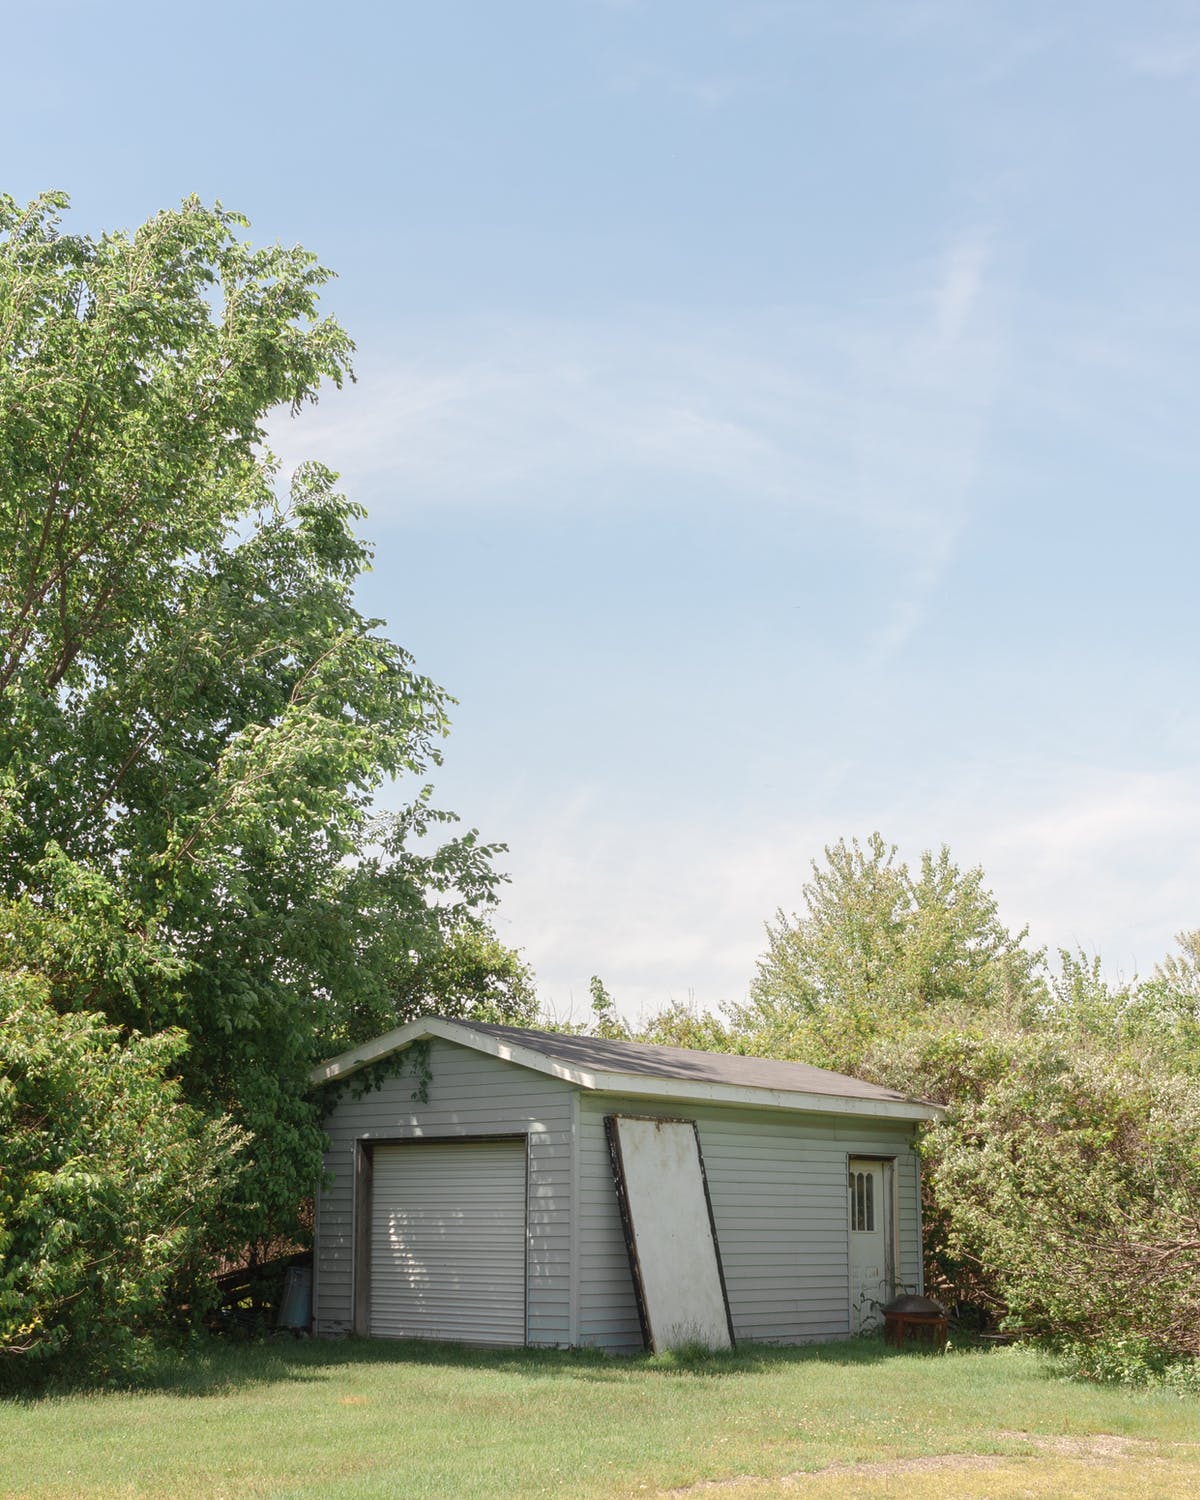 5 Reasons Why You Might Need a Backyard Shed